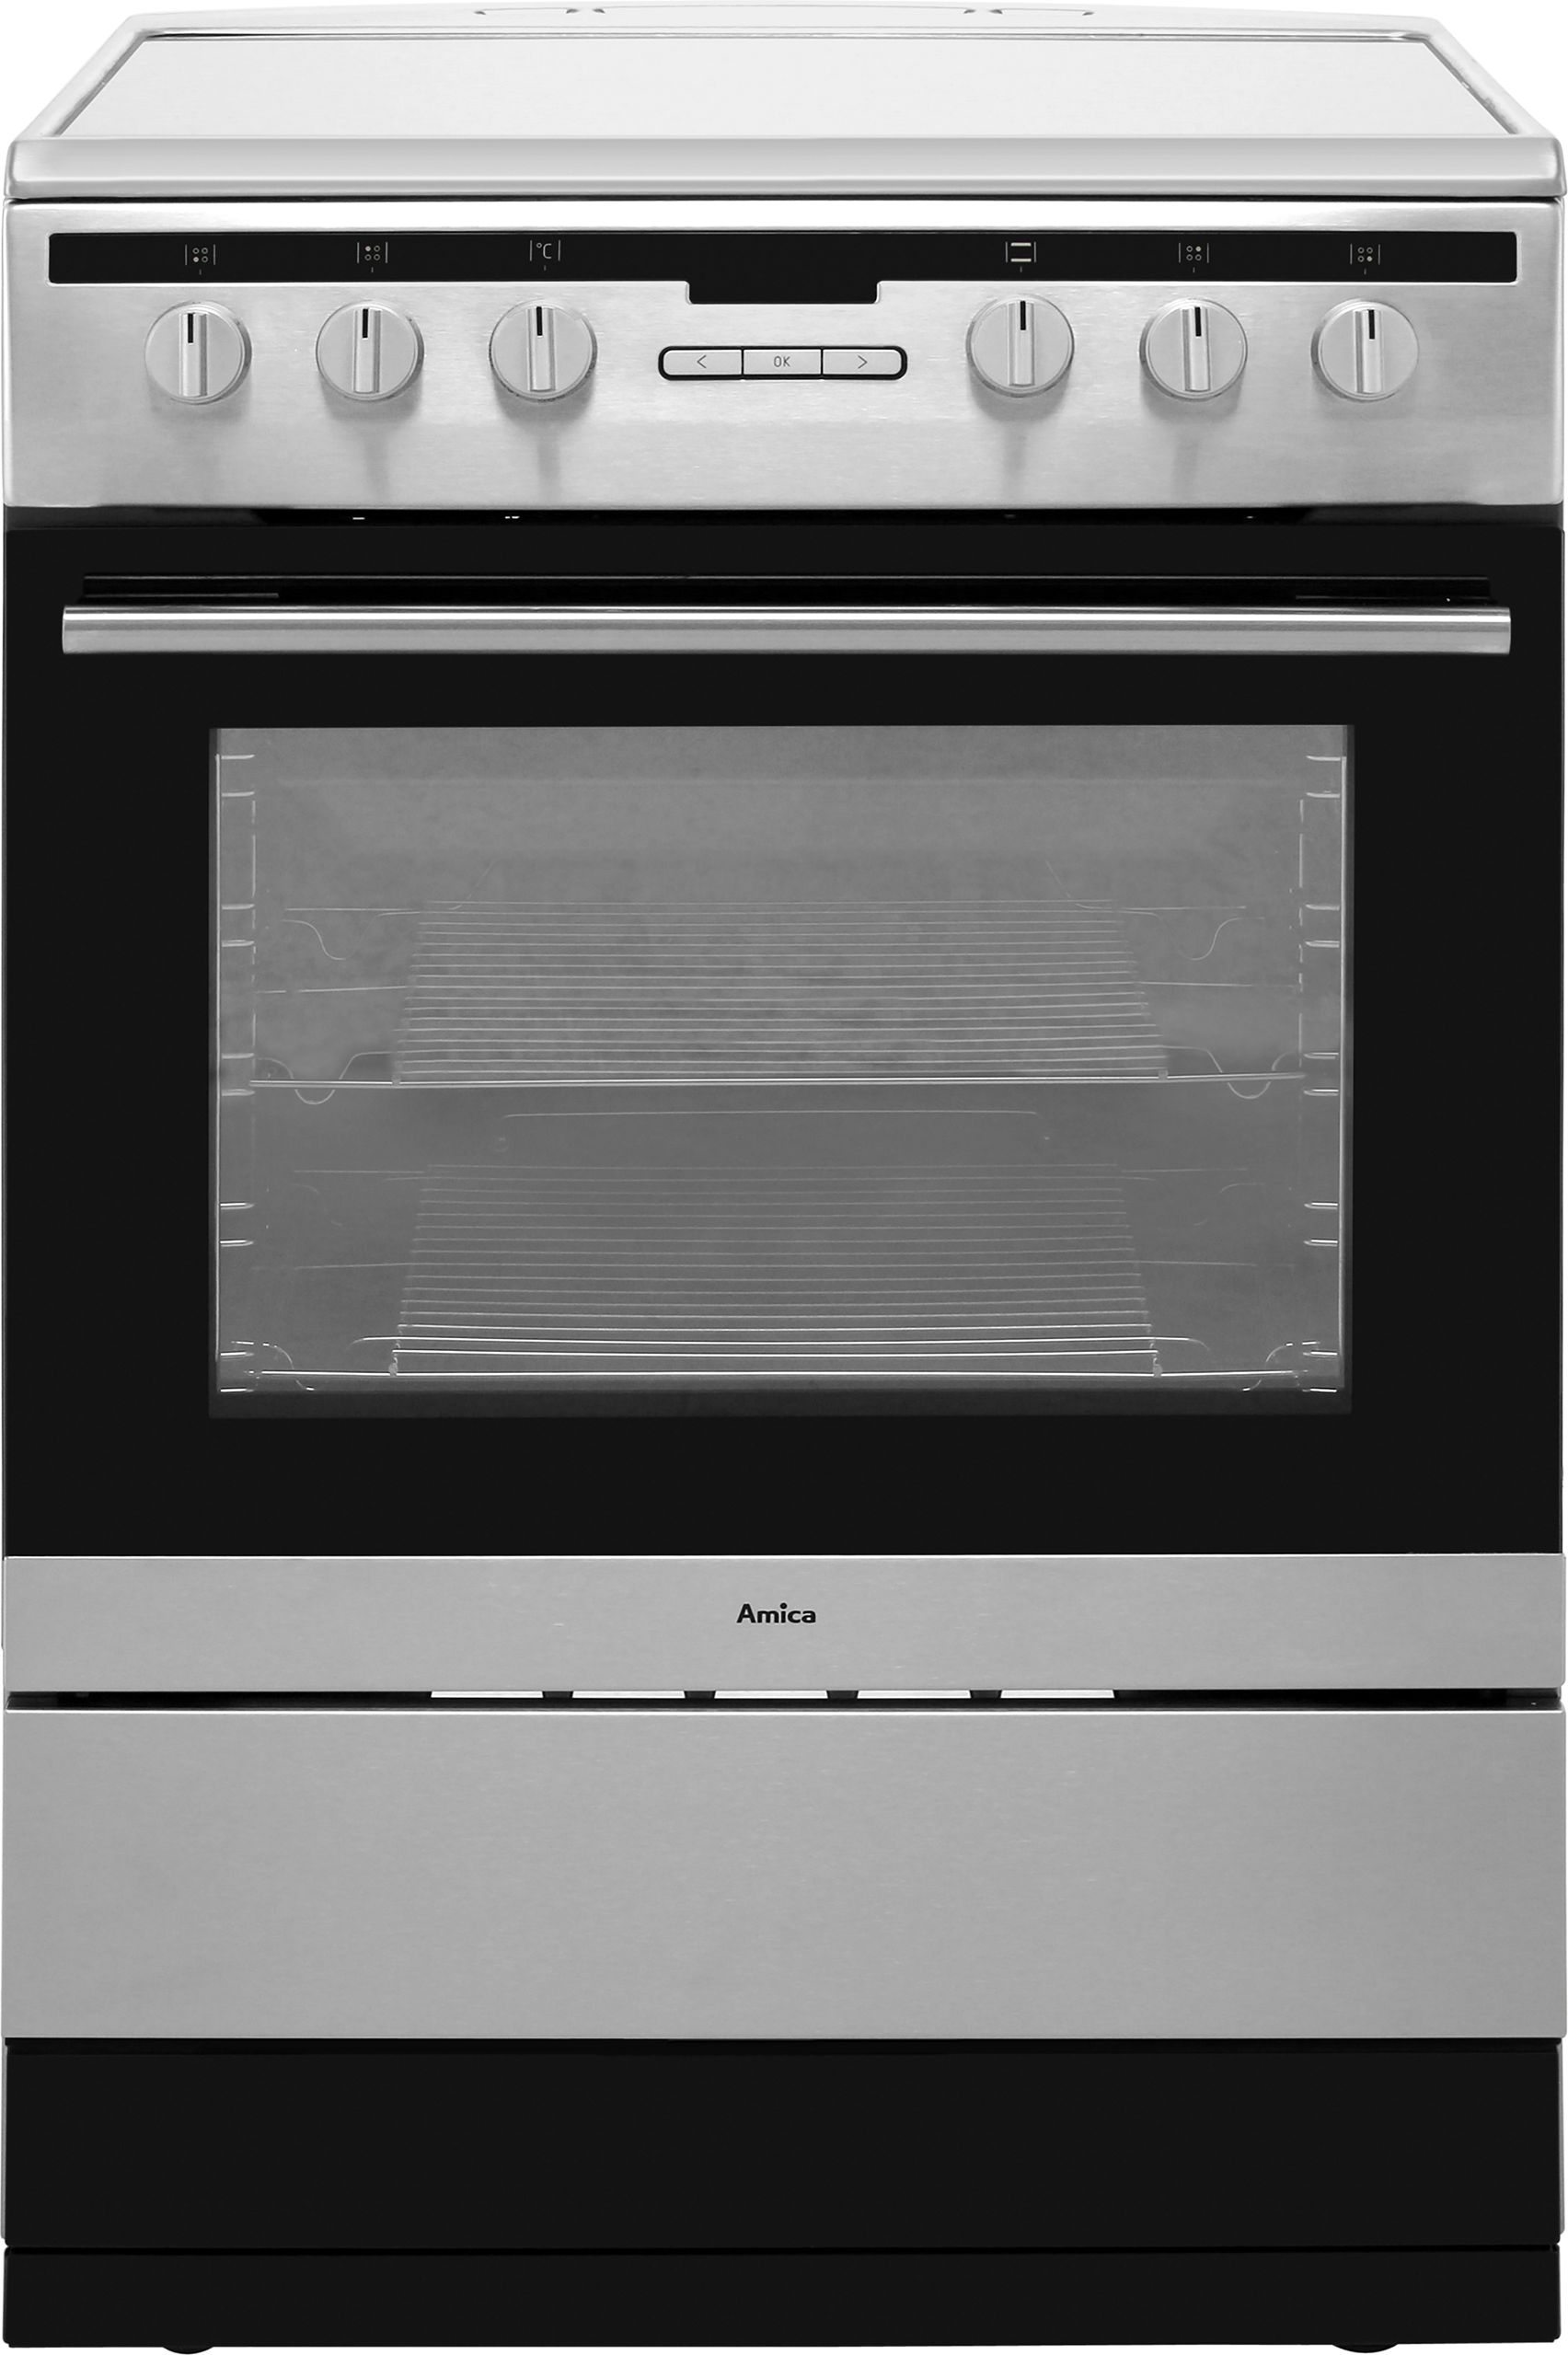 Amica 608CE2TAXX 60cm Electric Cooker with Ceramic Hob - Stainless Steel - A Rated, Stainless Steel